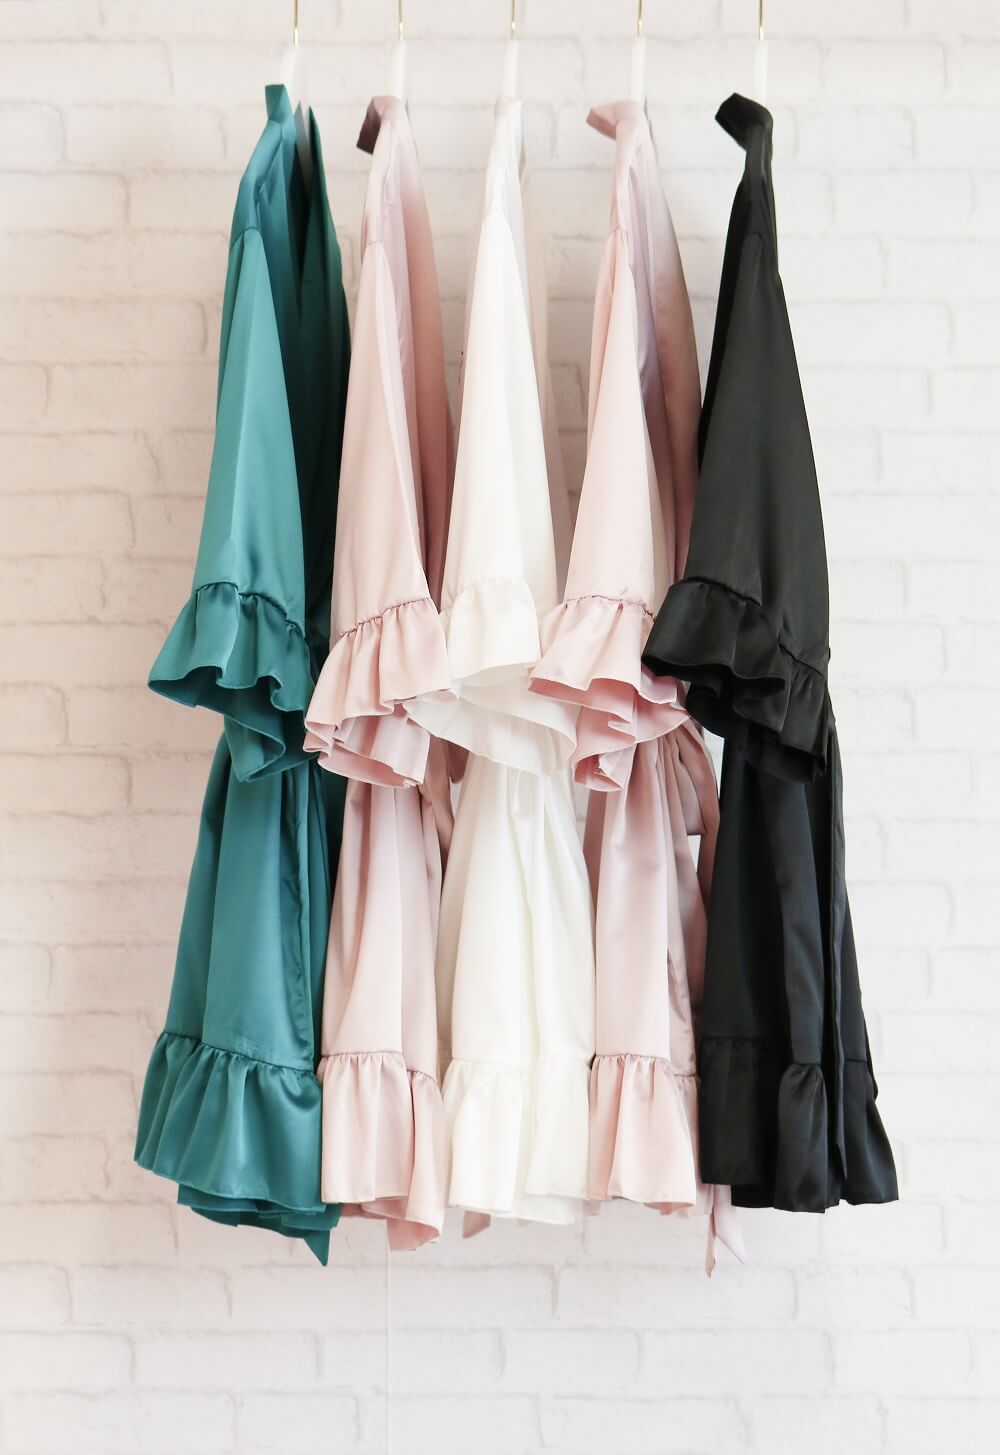 ruffled robes can be personalized for bridesmaids and bridal party